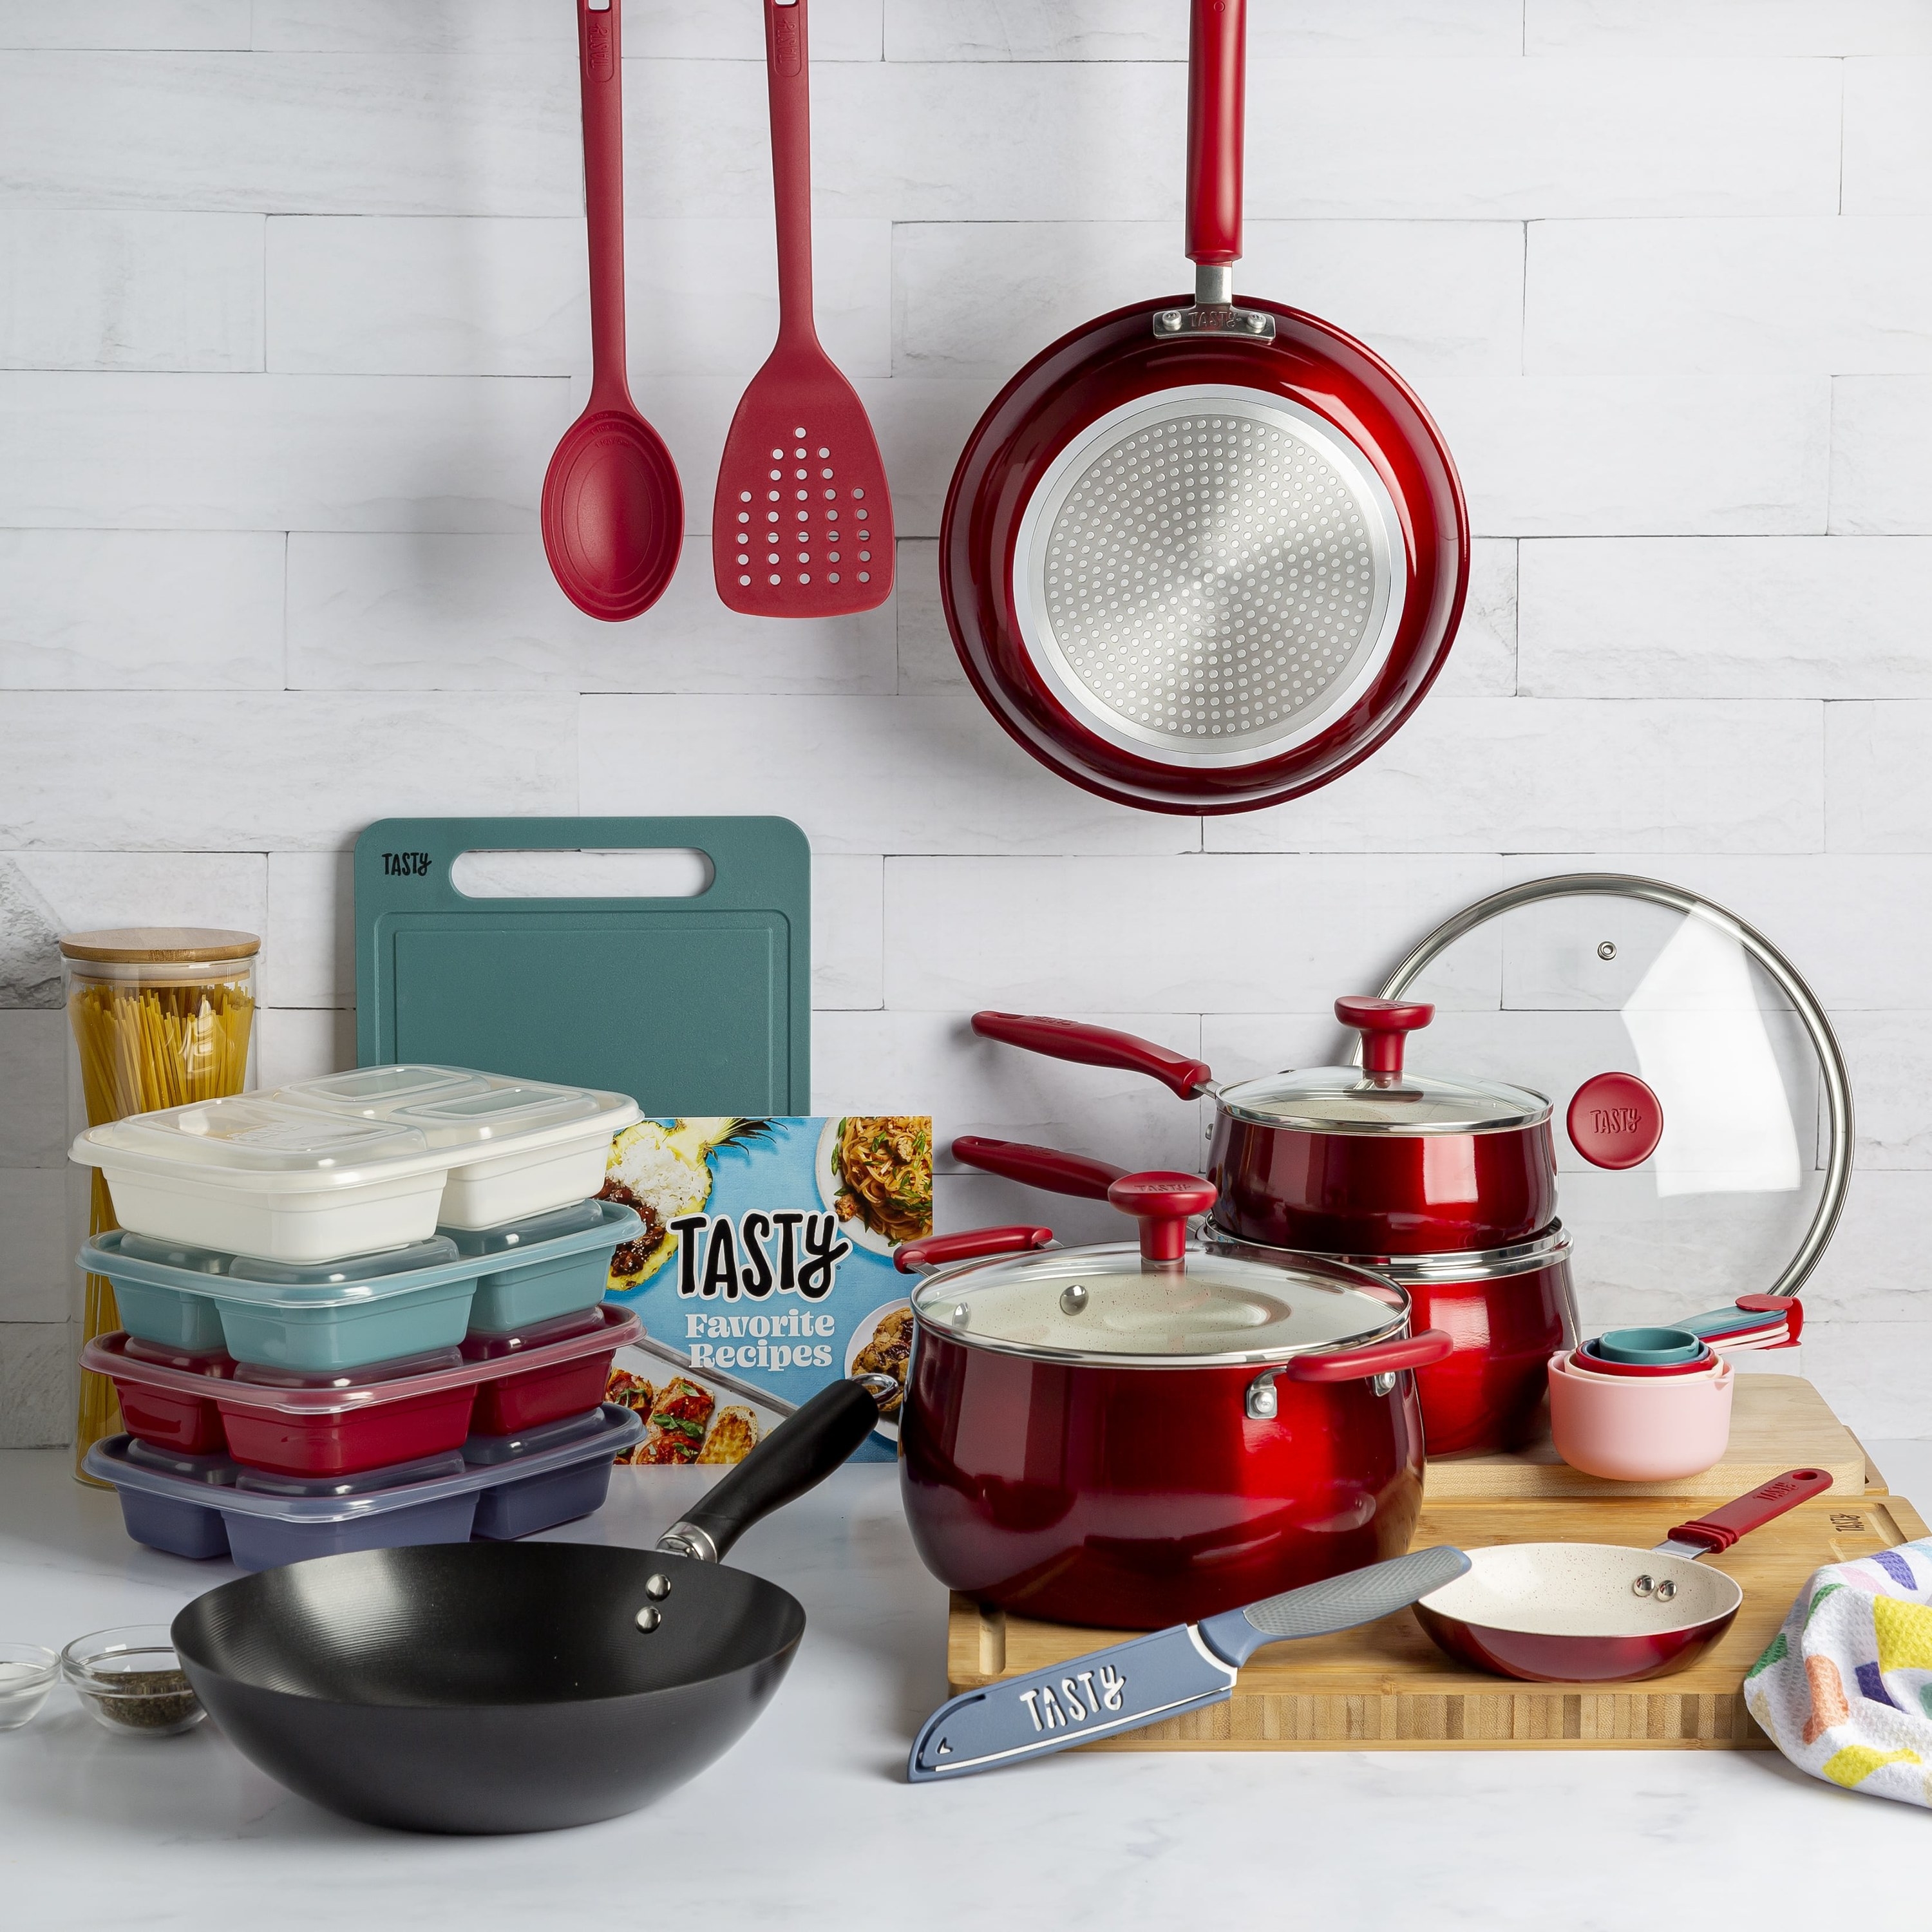 Cook Healthy With Tasty's Latest Non-Stick Cookware